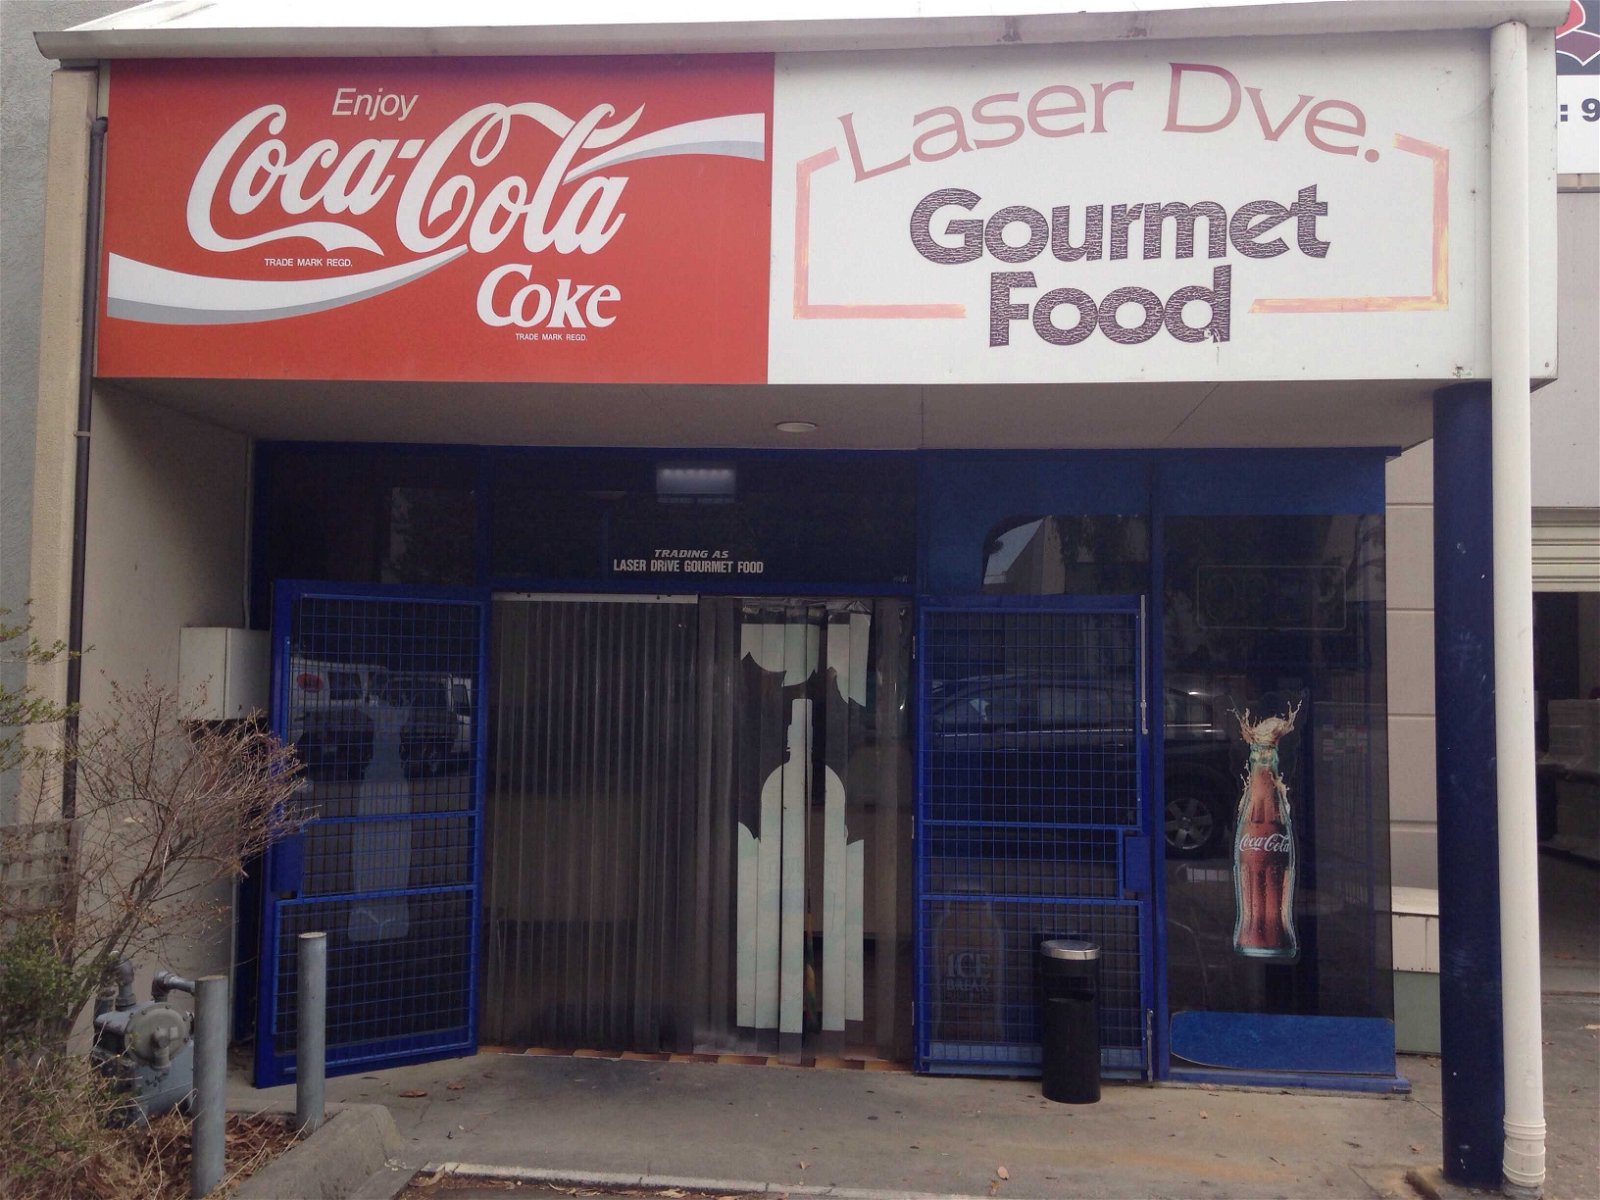 Laser Drive Gourmet Food - New South Wales Tourism 